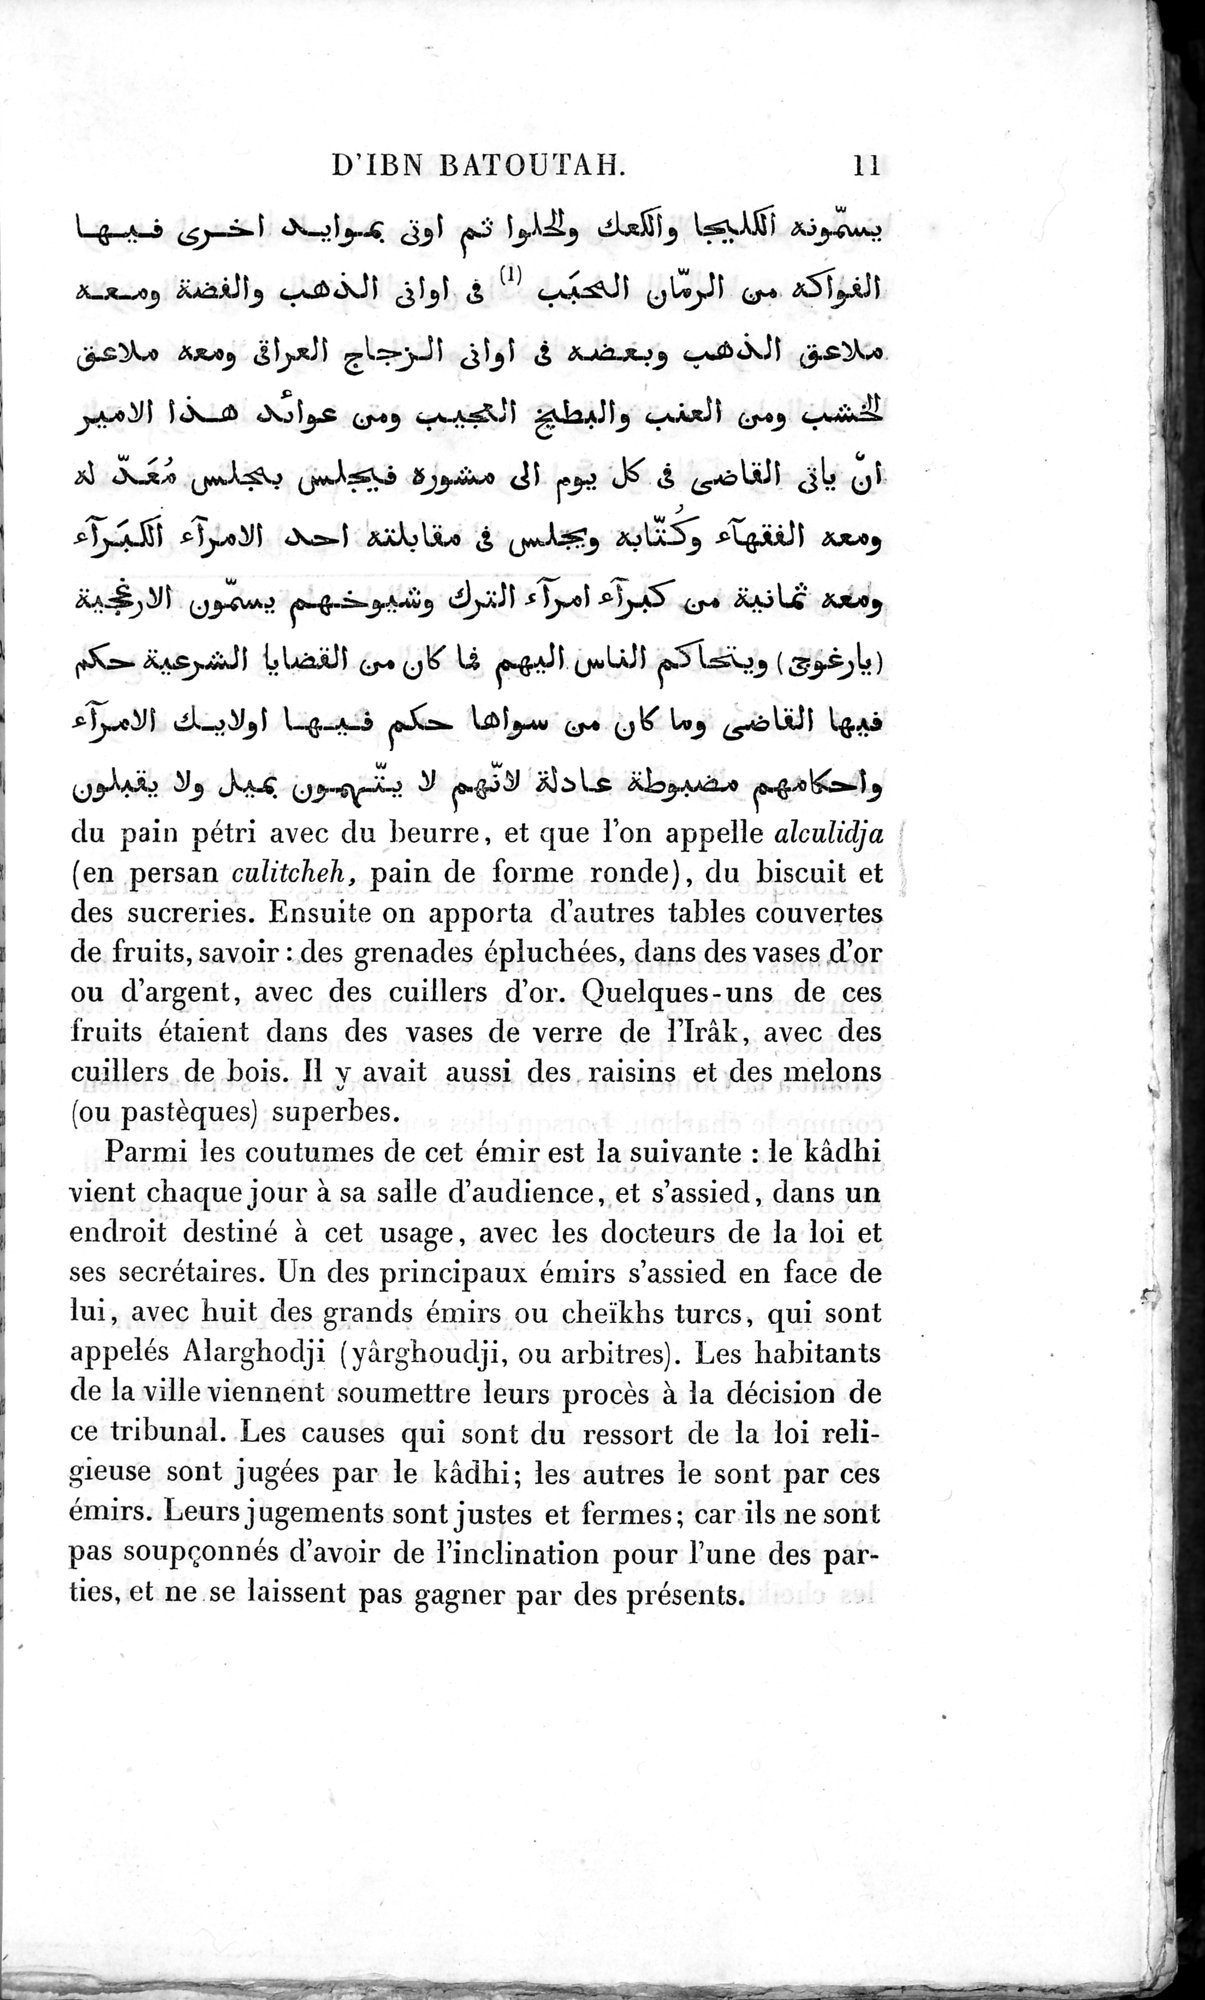 Voyages d'Ibn Batoutah : vol.3 / Page 51 (Grayscale High Resolution Image)